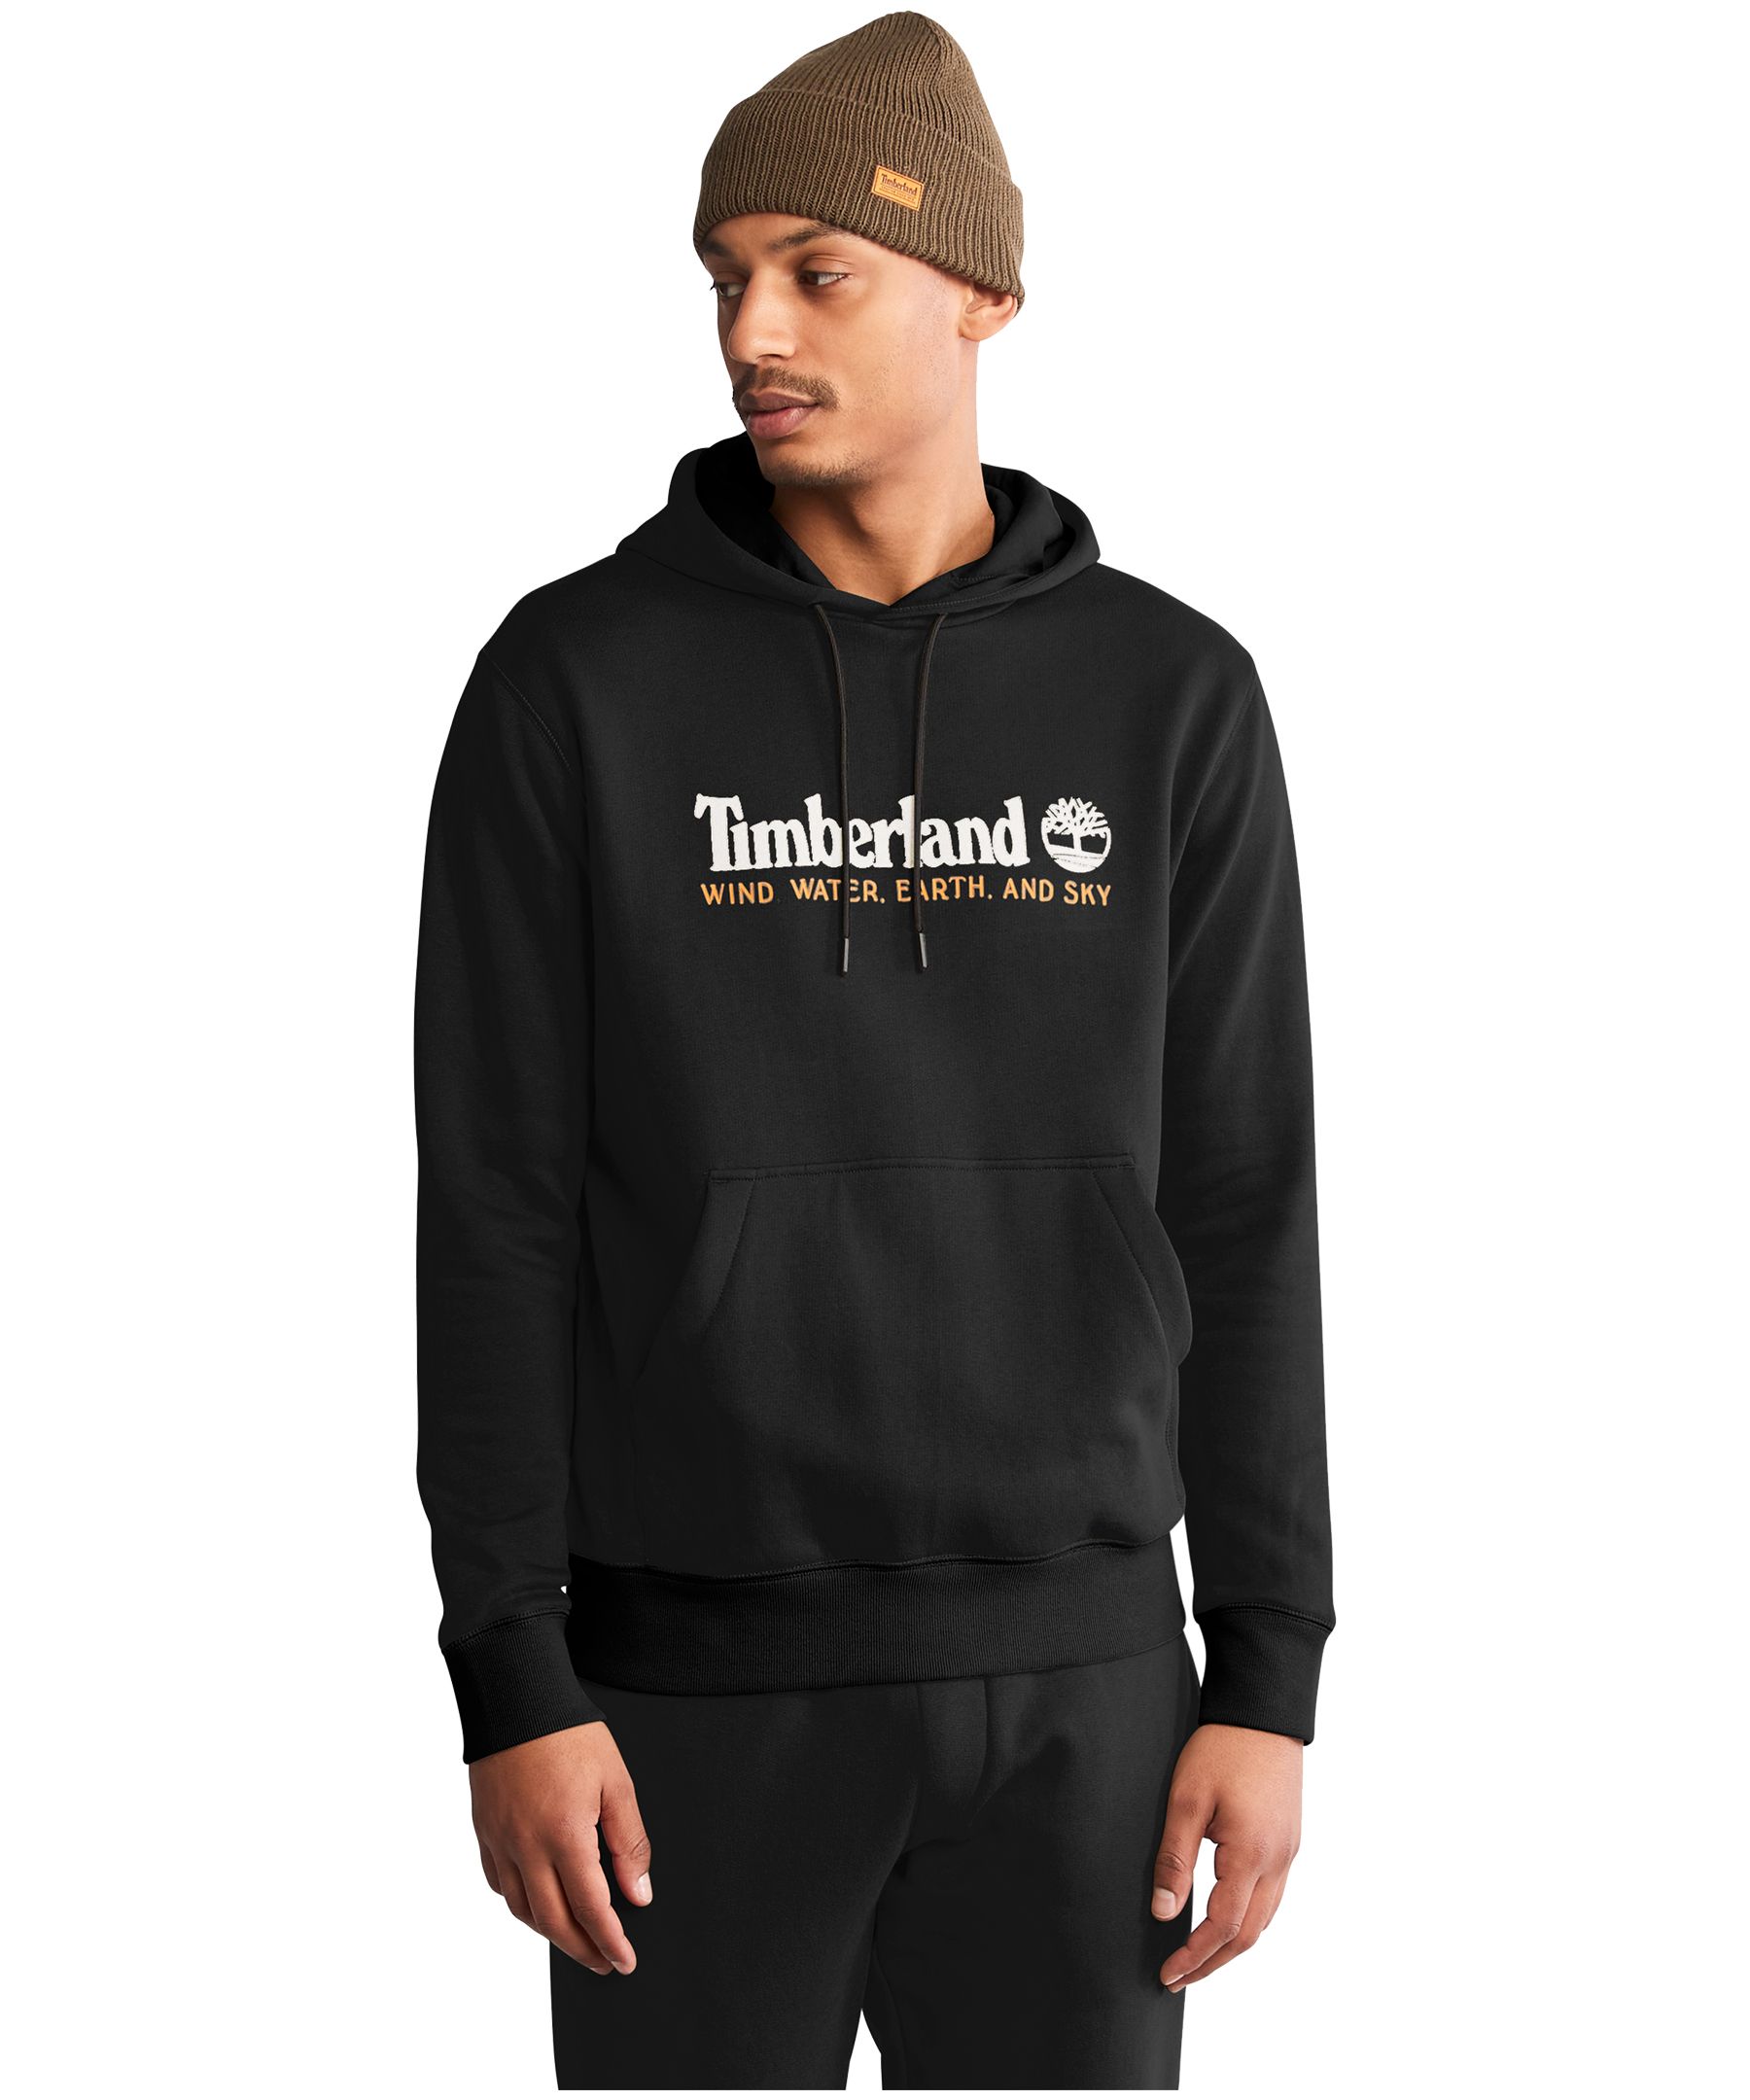 Bonnet Timberland Homme Ribbed Charcoal Heather